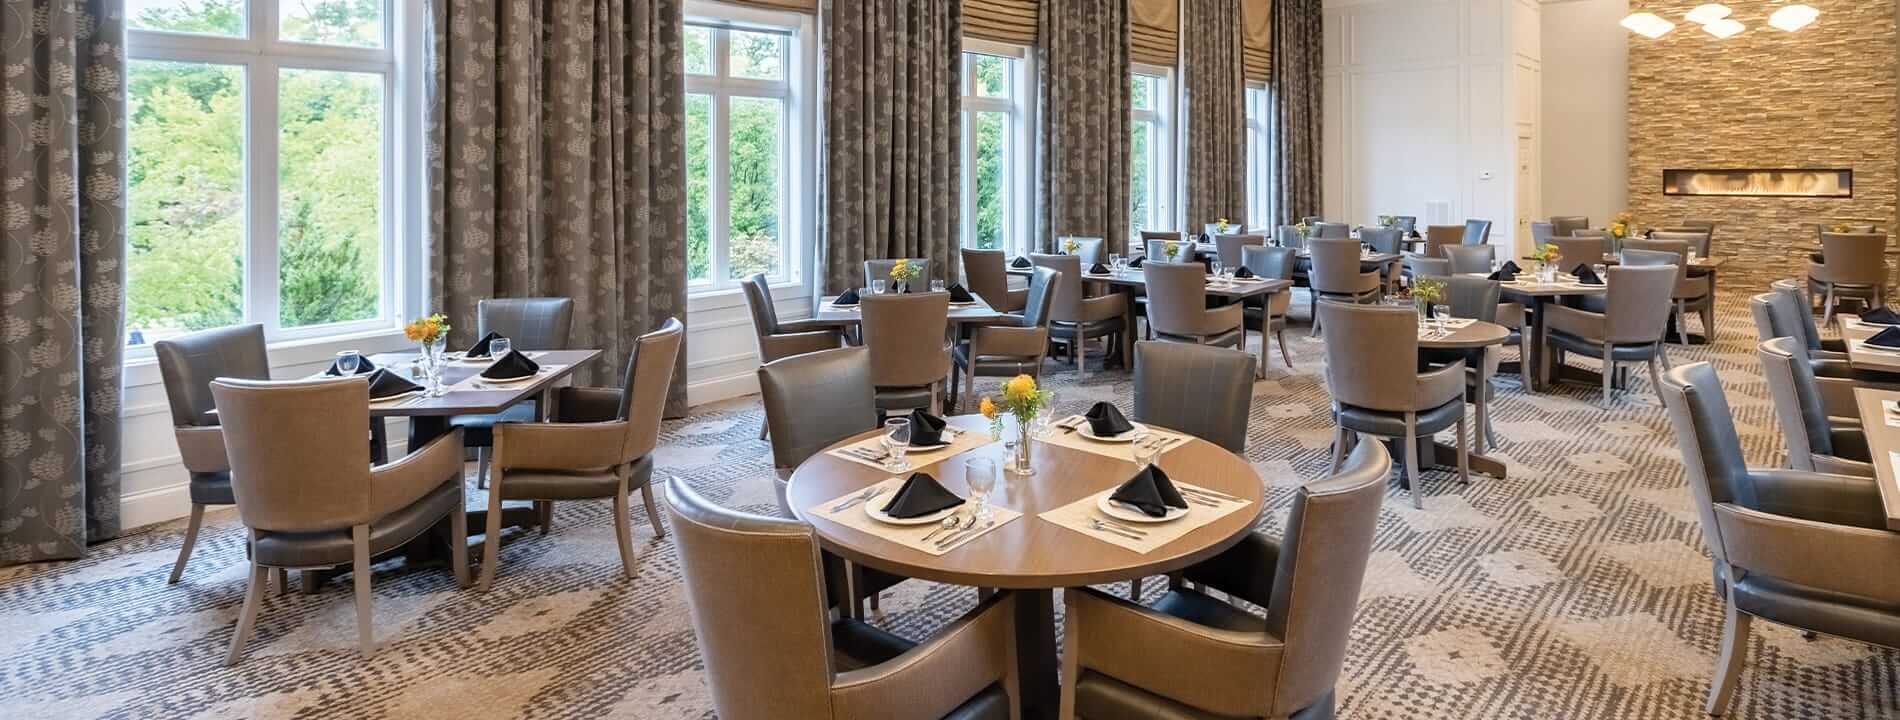 A dining area at The Watermark at St. Peters.